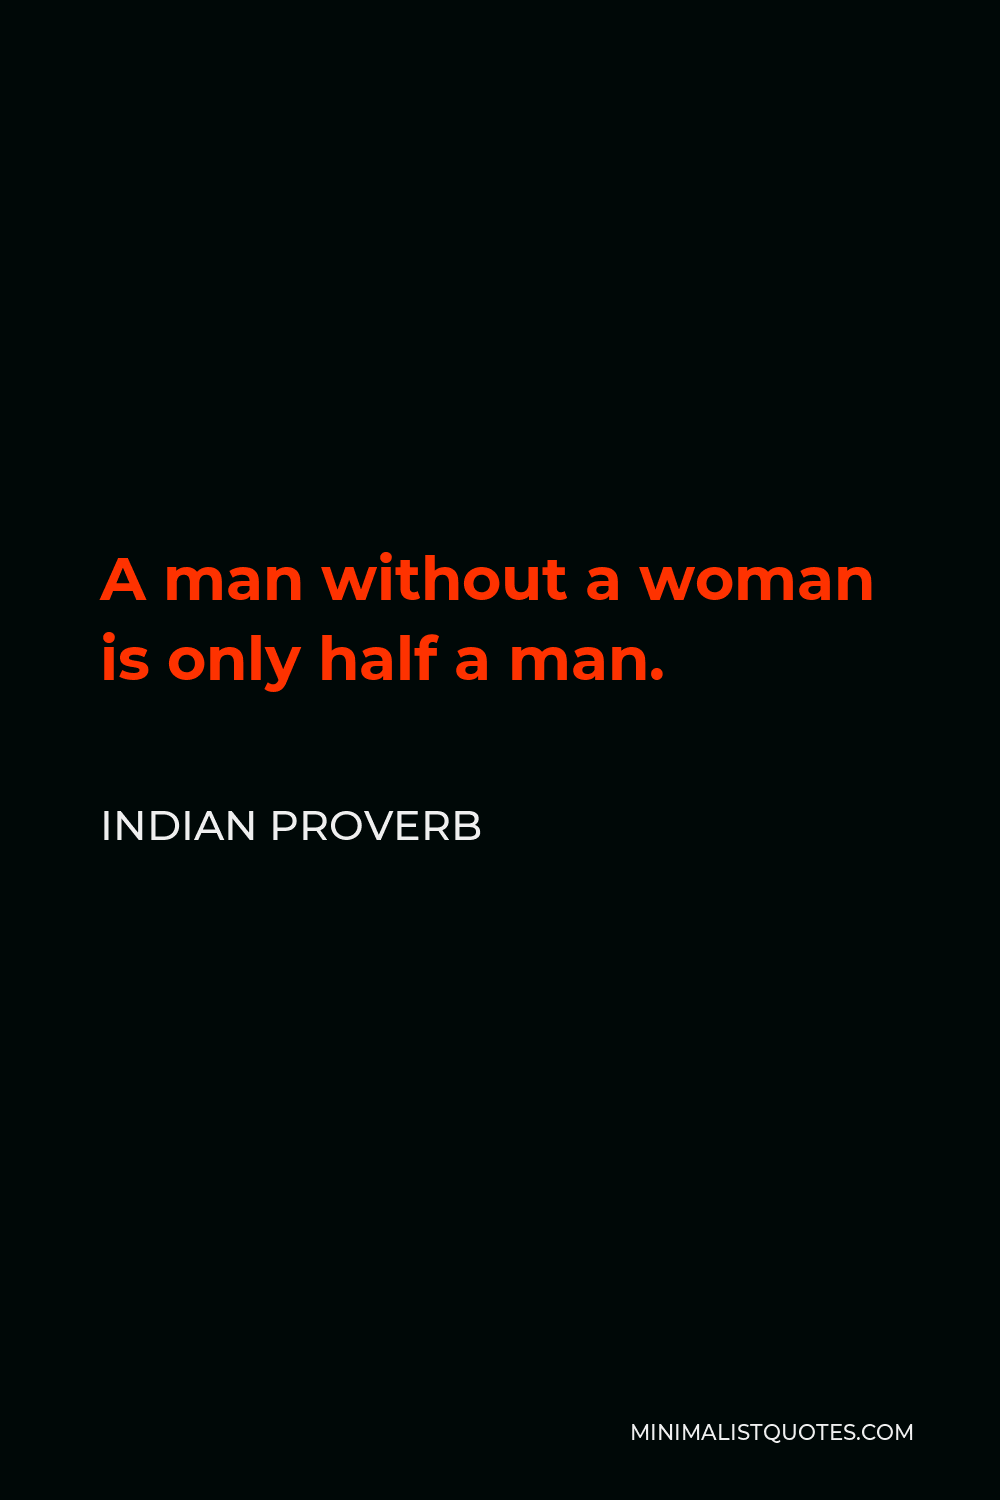 Indian Proverb Quote - A man without a woman is only half a man.